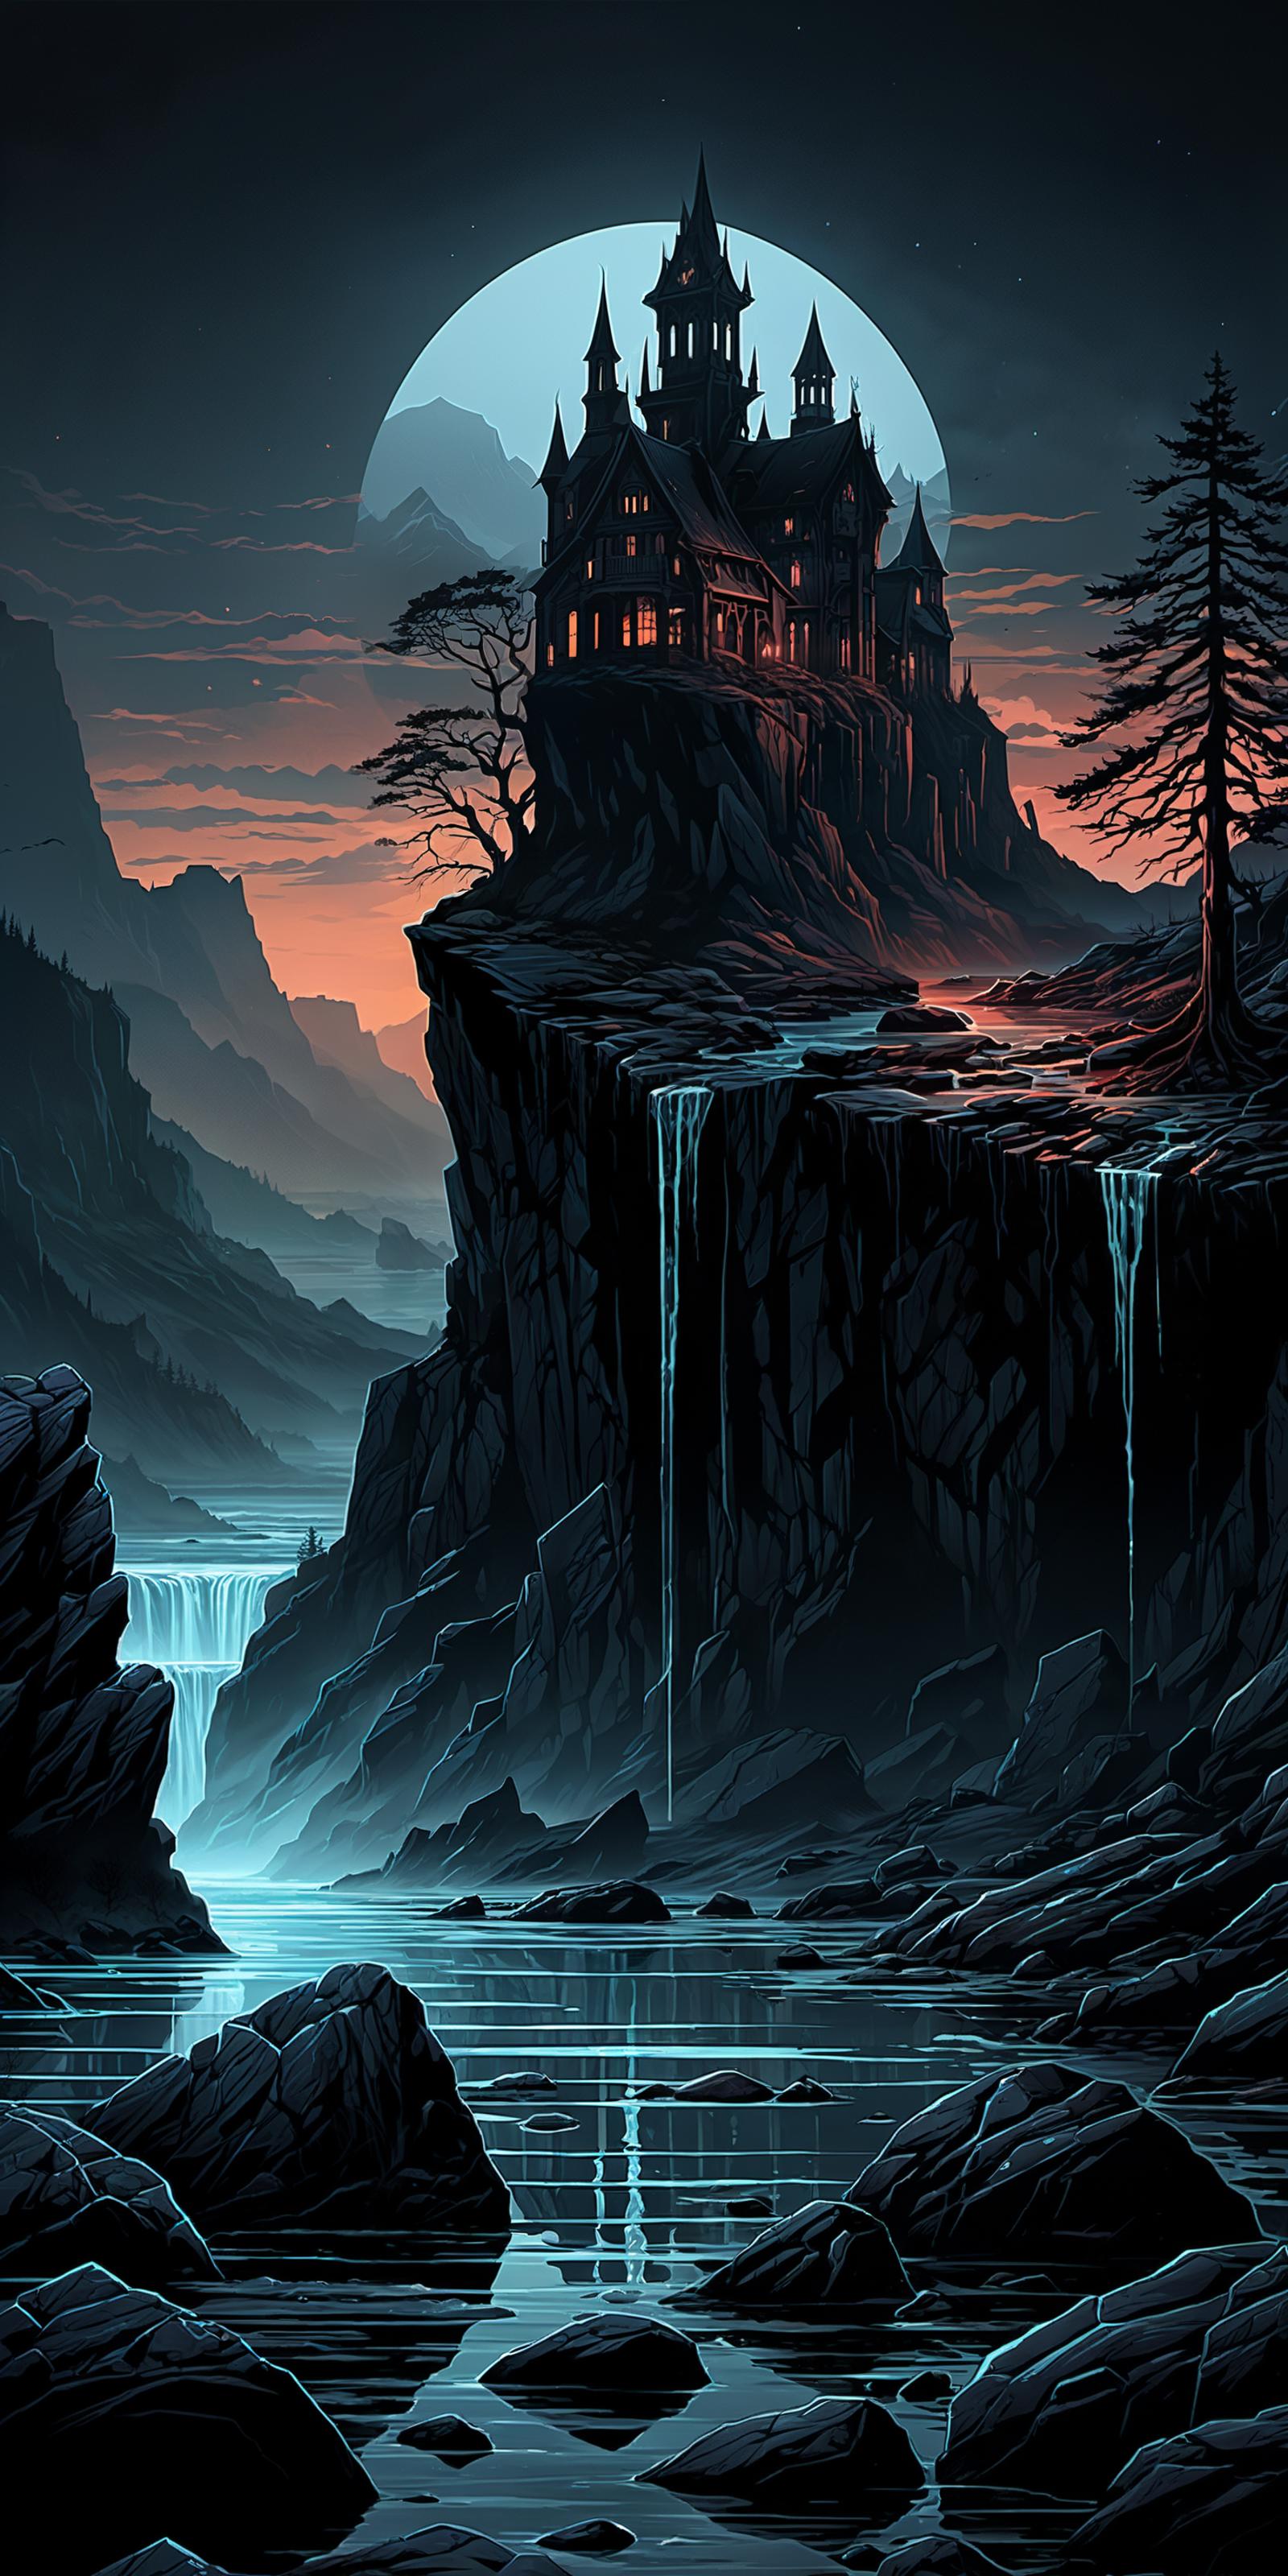 A beautifully illustrated scene of waterfalls, mountains, and a castle.